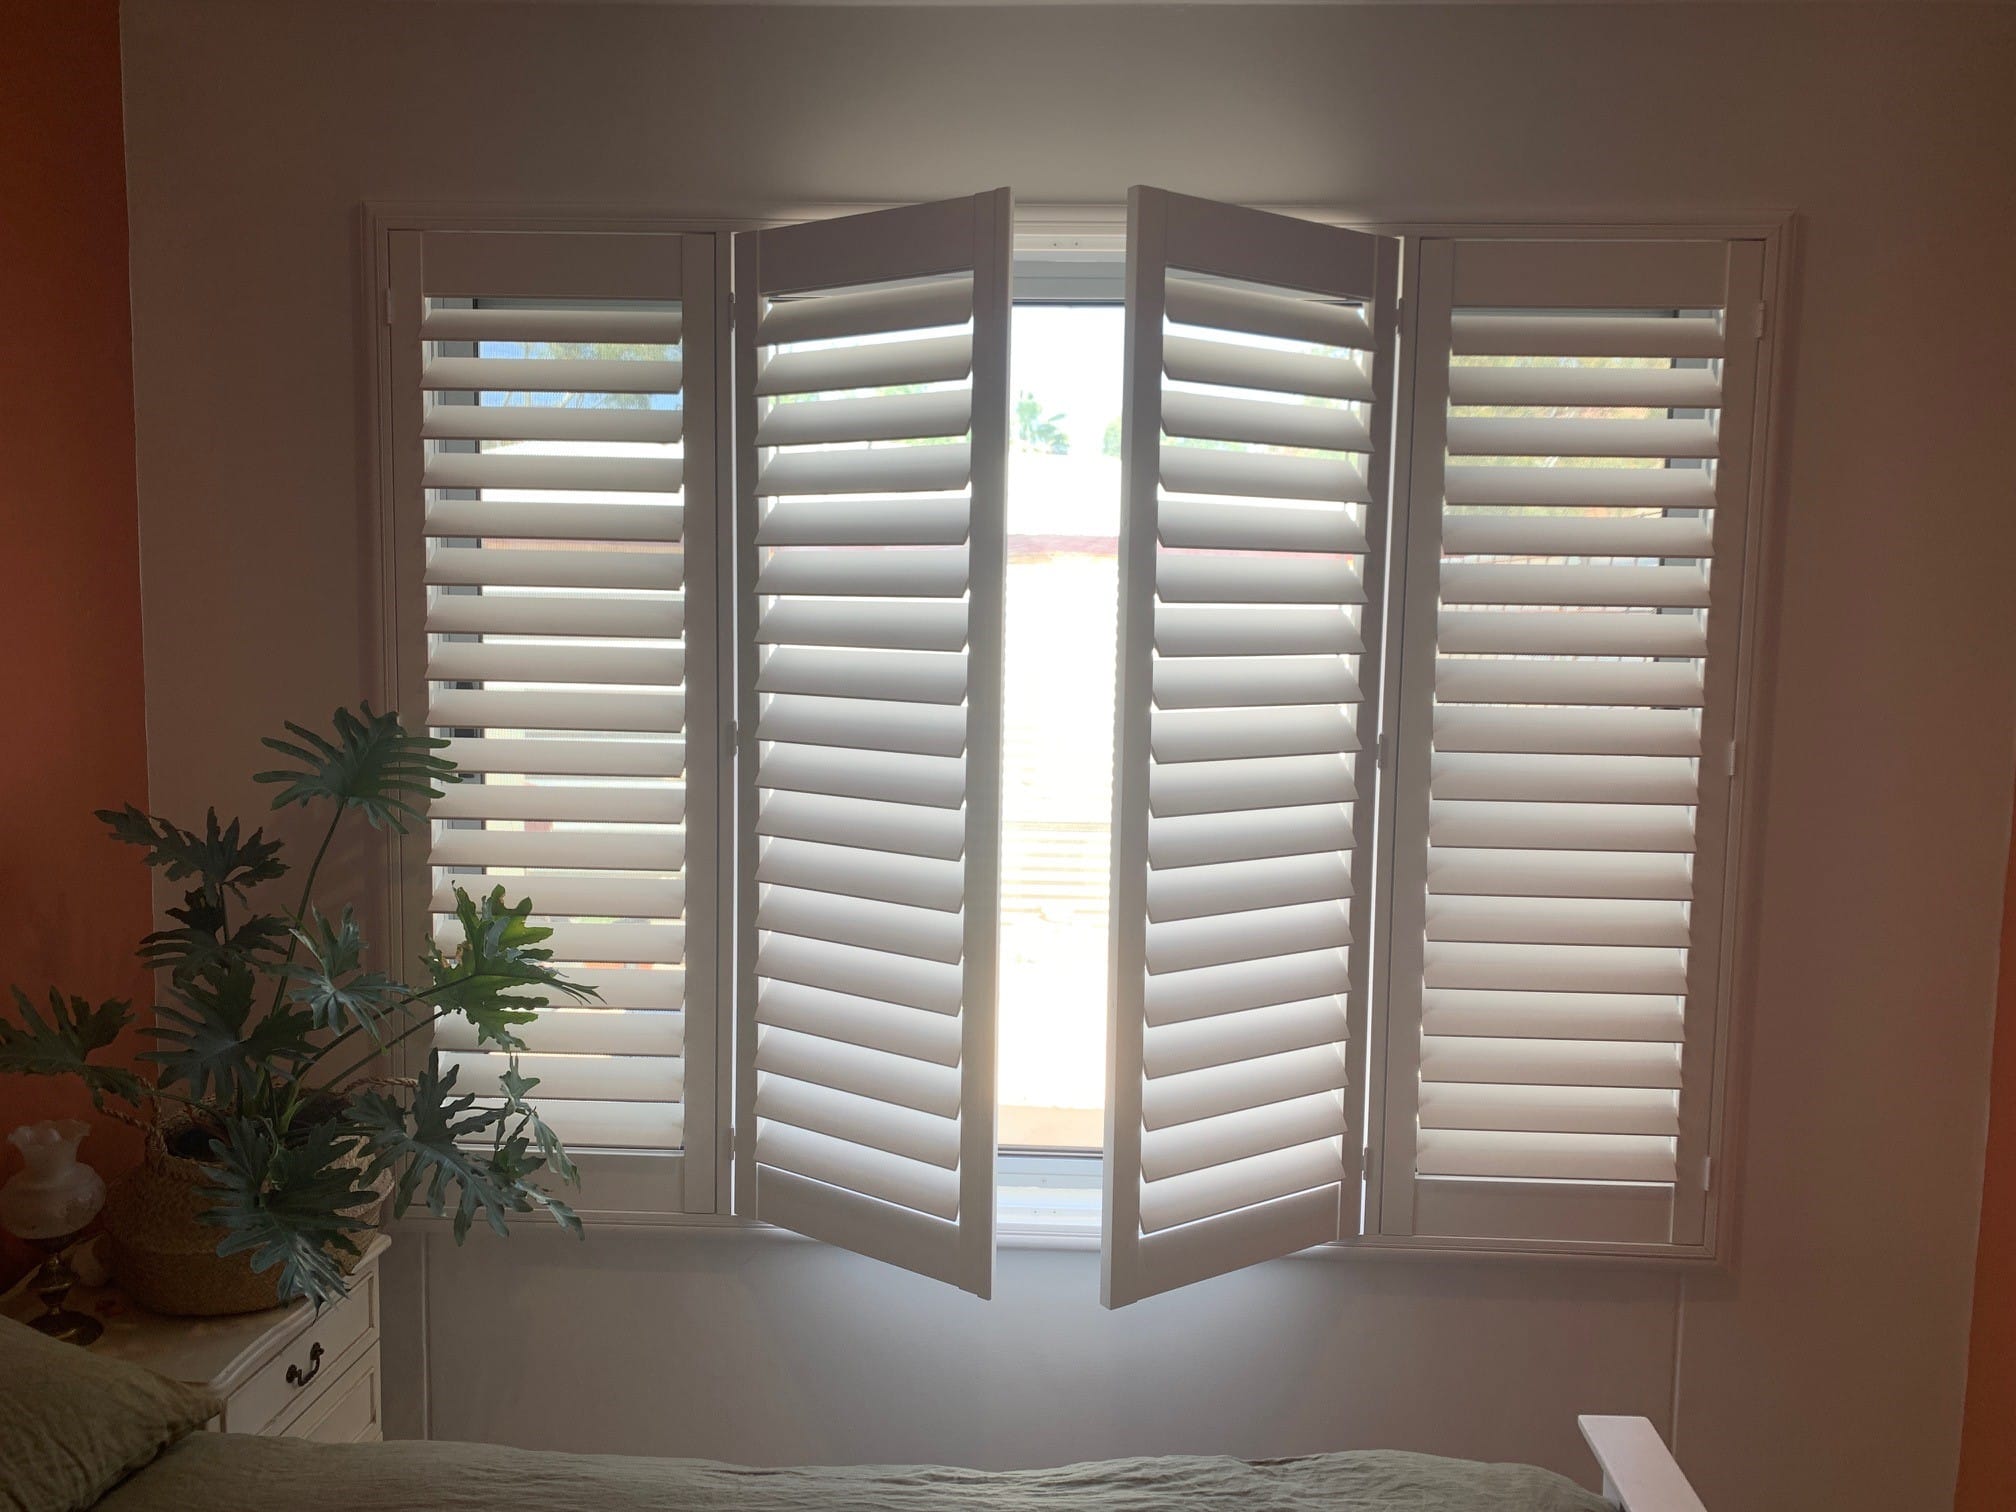 plantation shutters installed in home entrance way